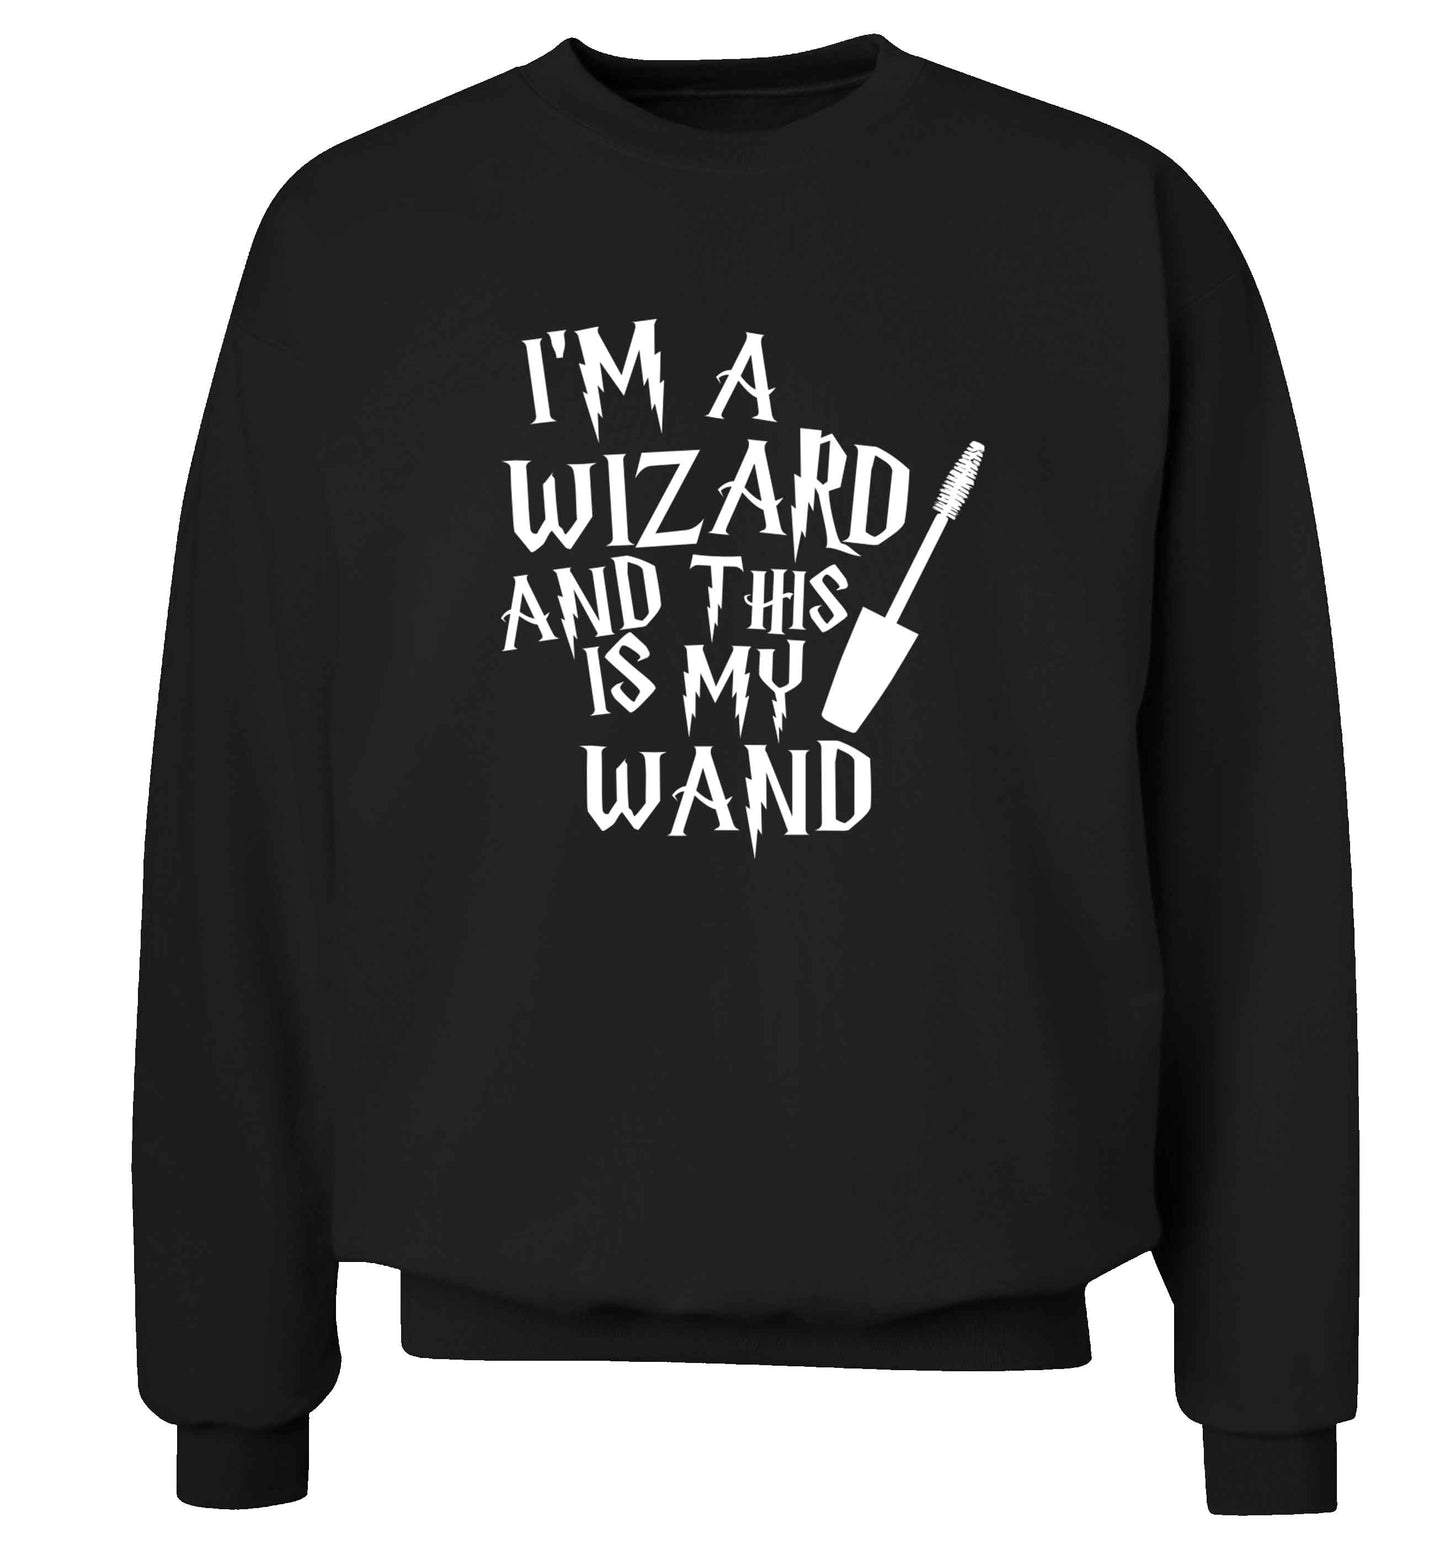 I'm a wizard and this is my wand Adult's unisex black Sweater 2XL